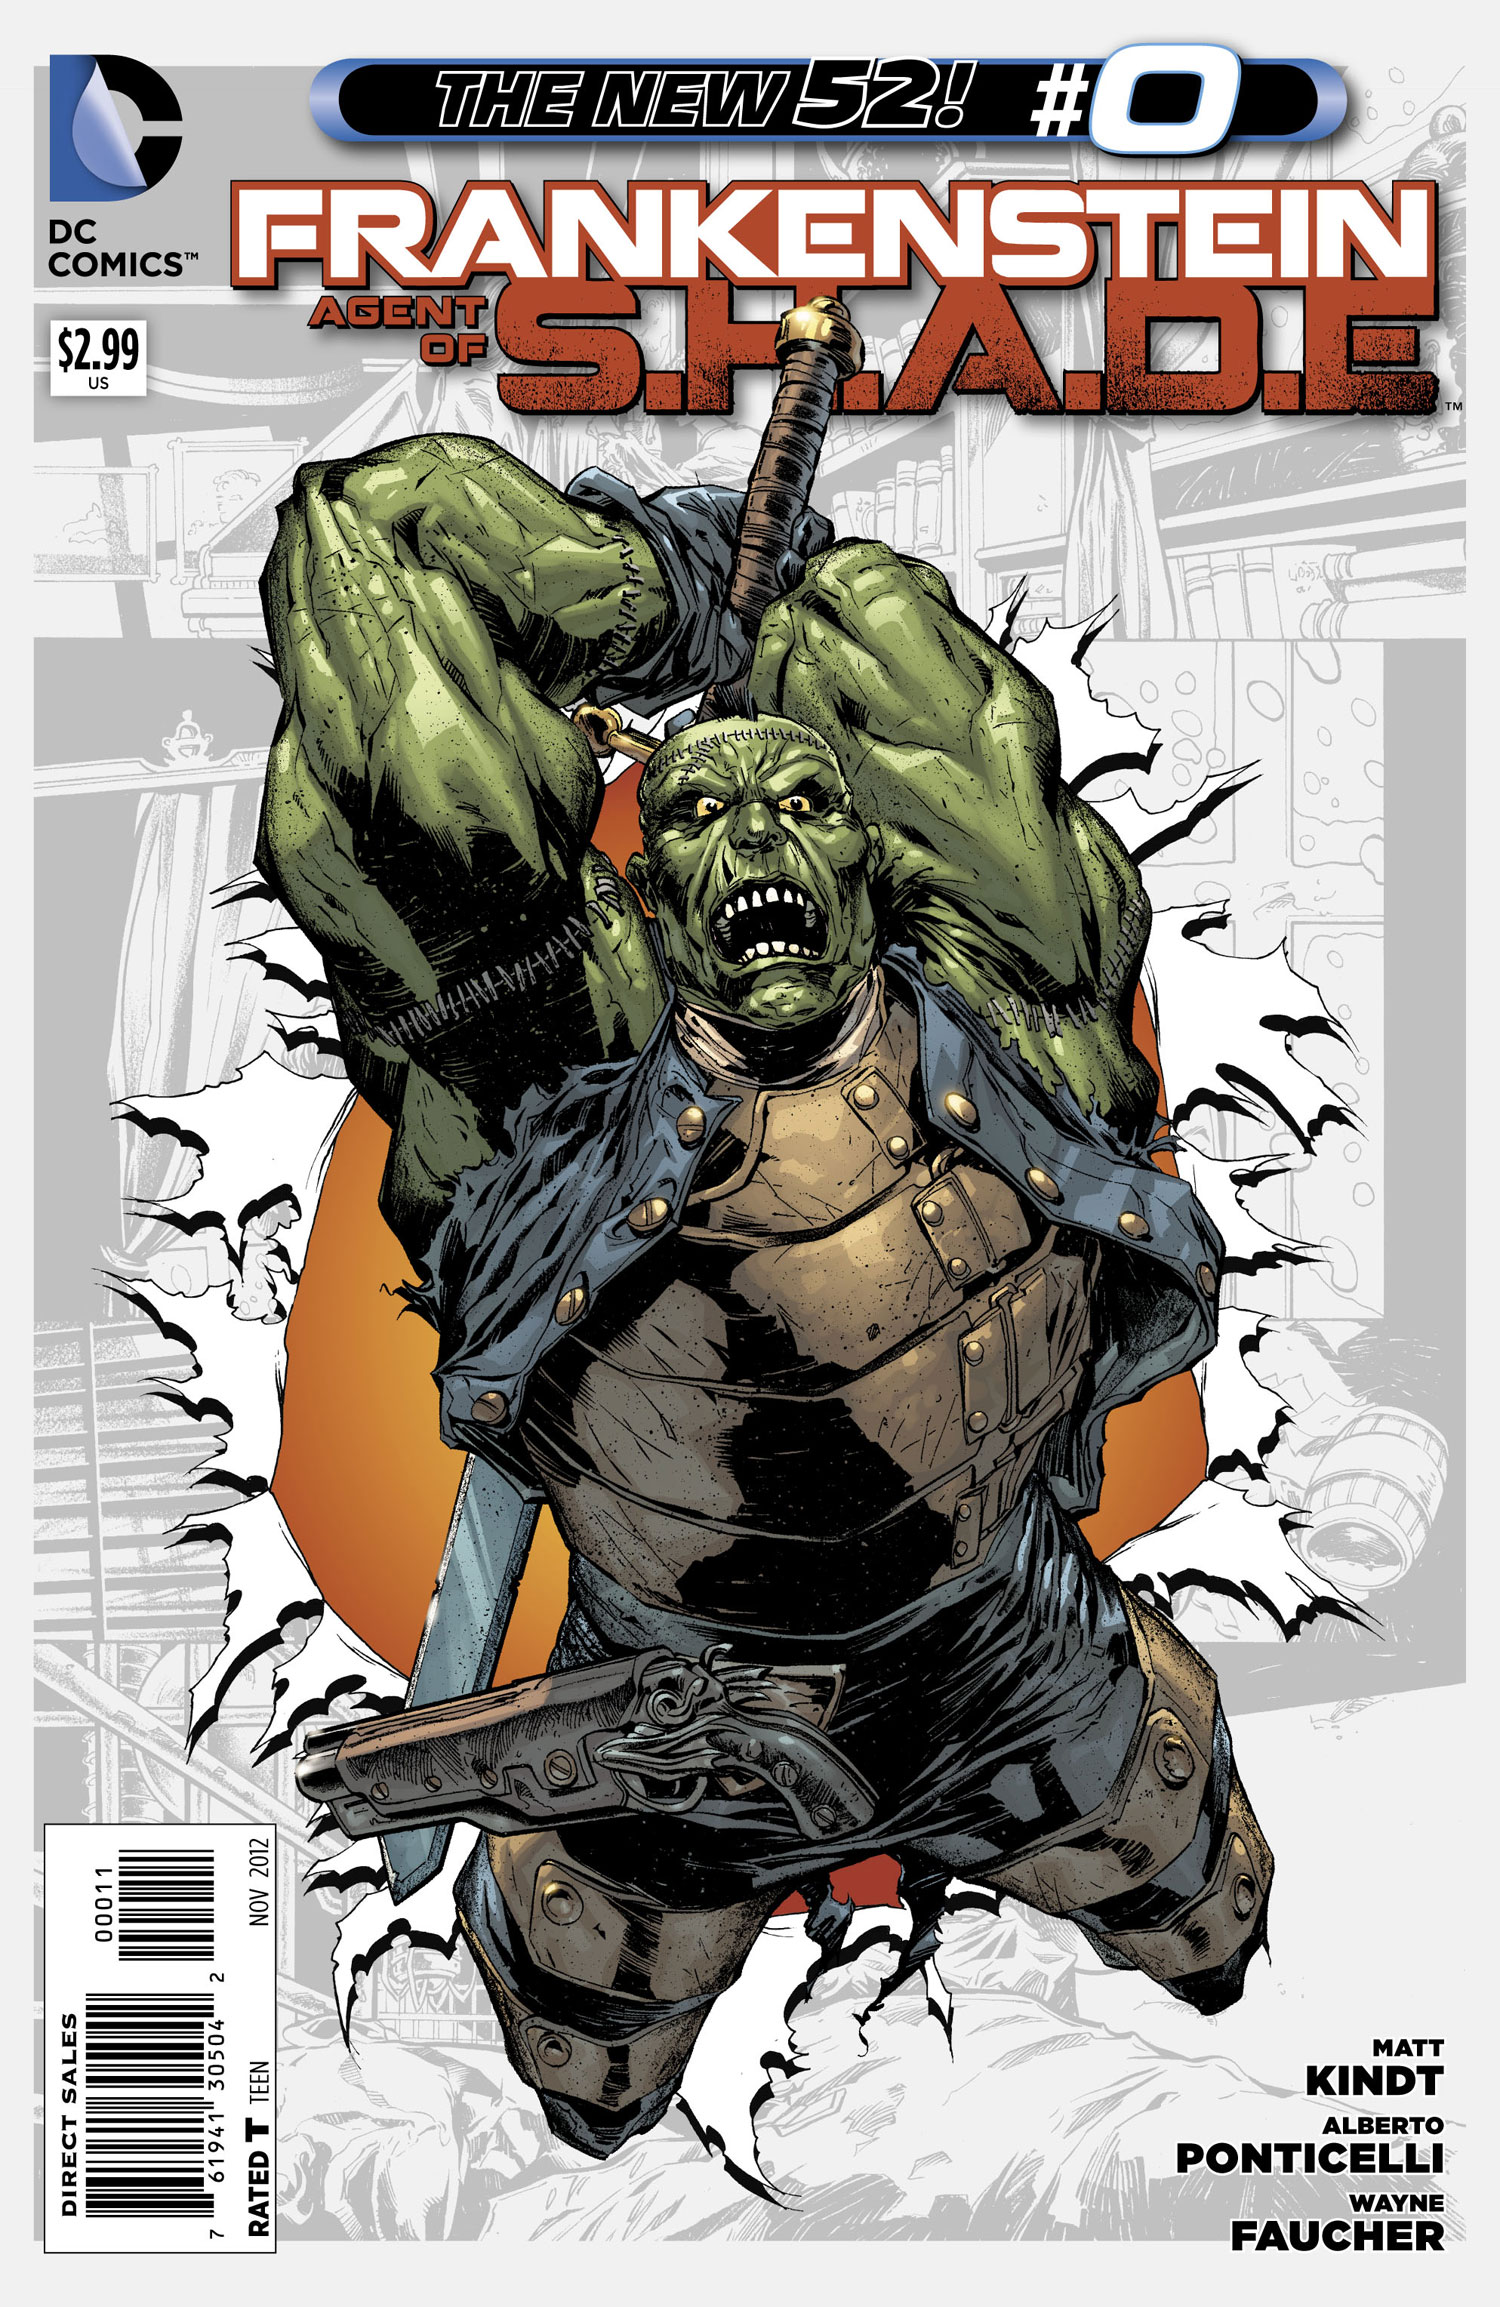 Frankenstein Agent Of S.H.A.D.E. #1